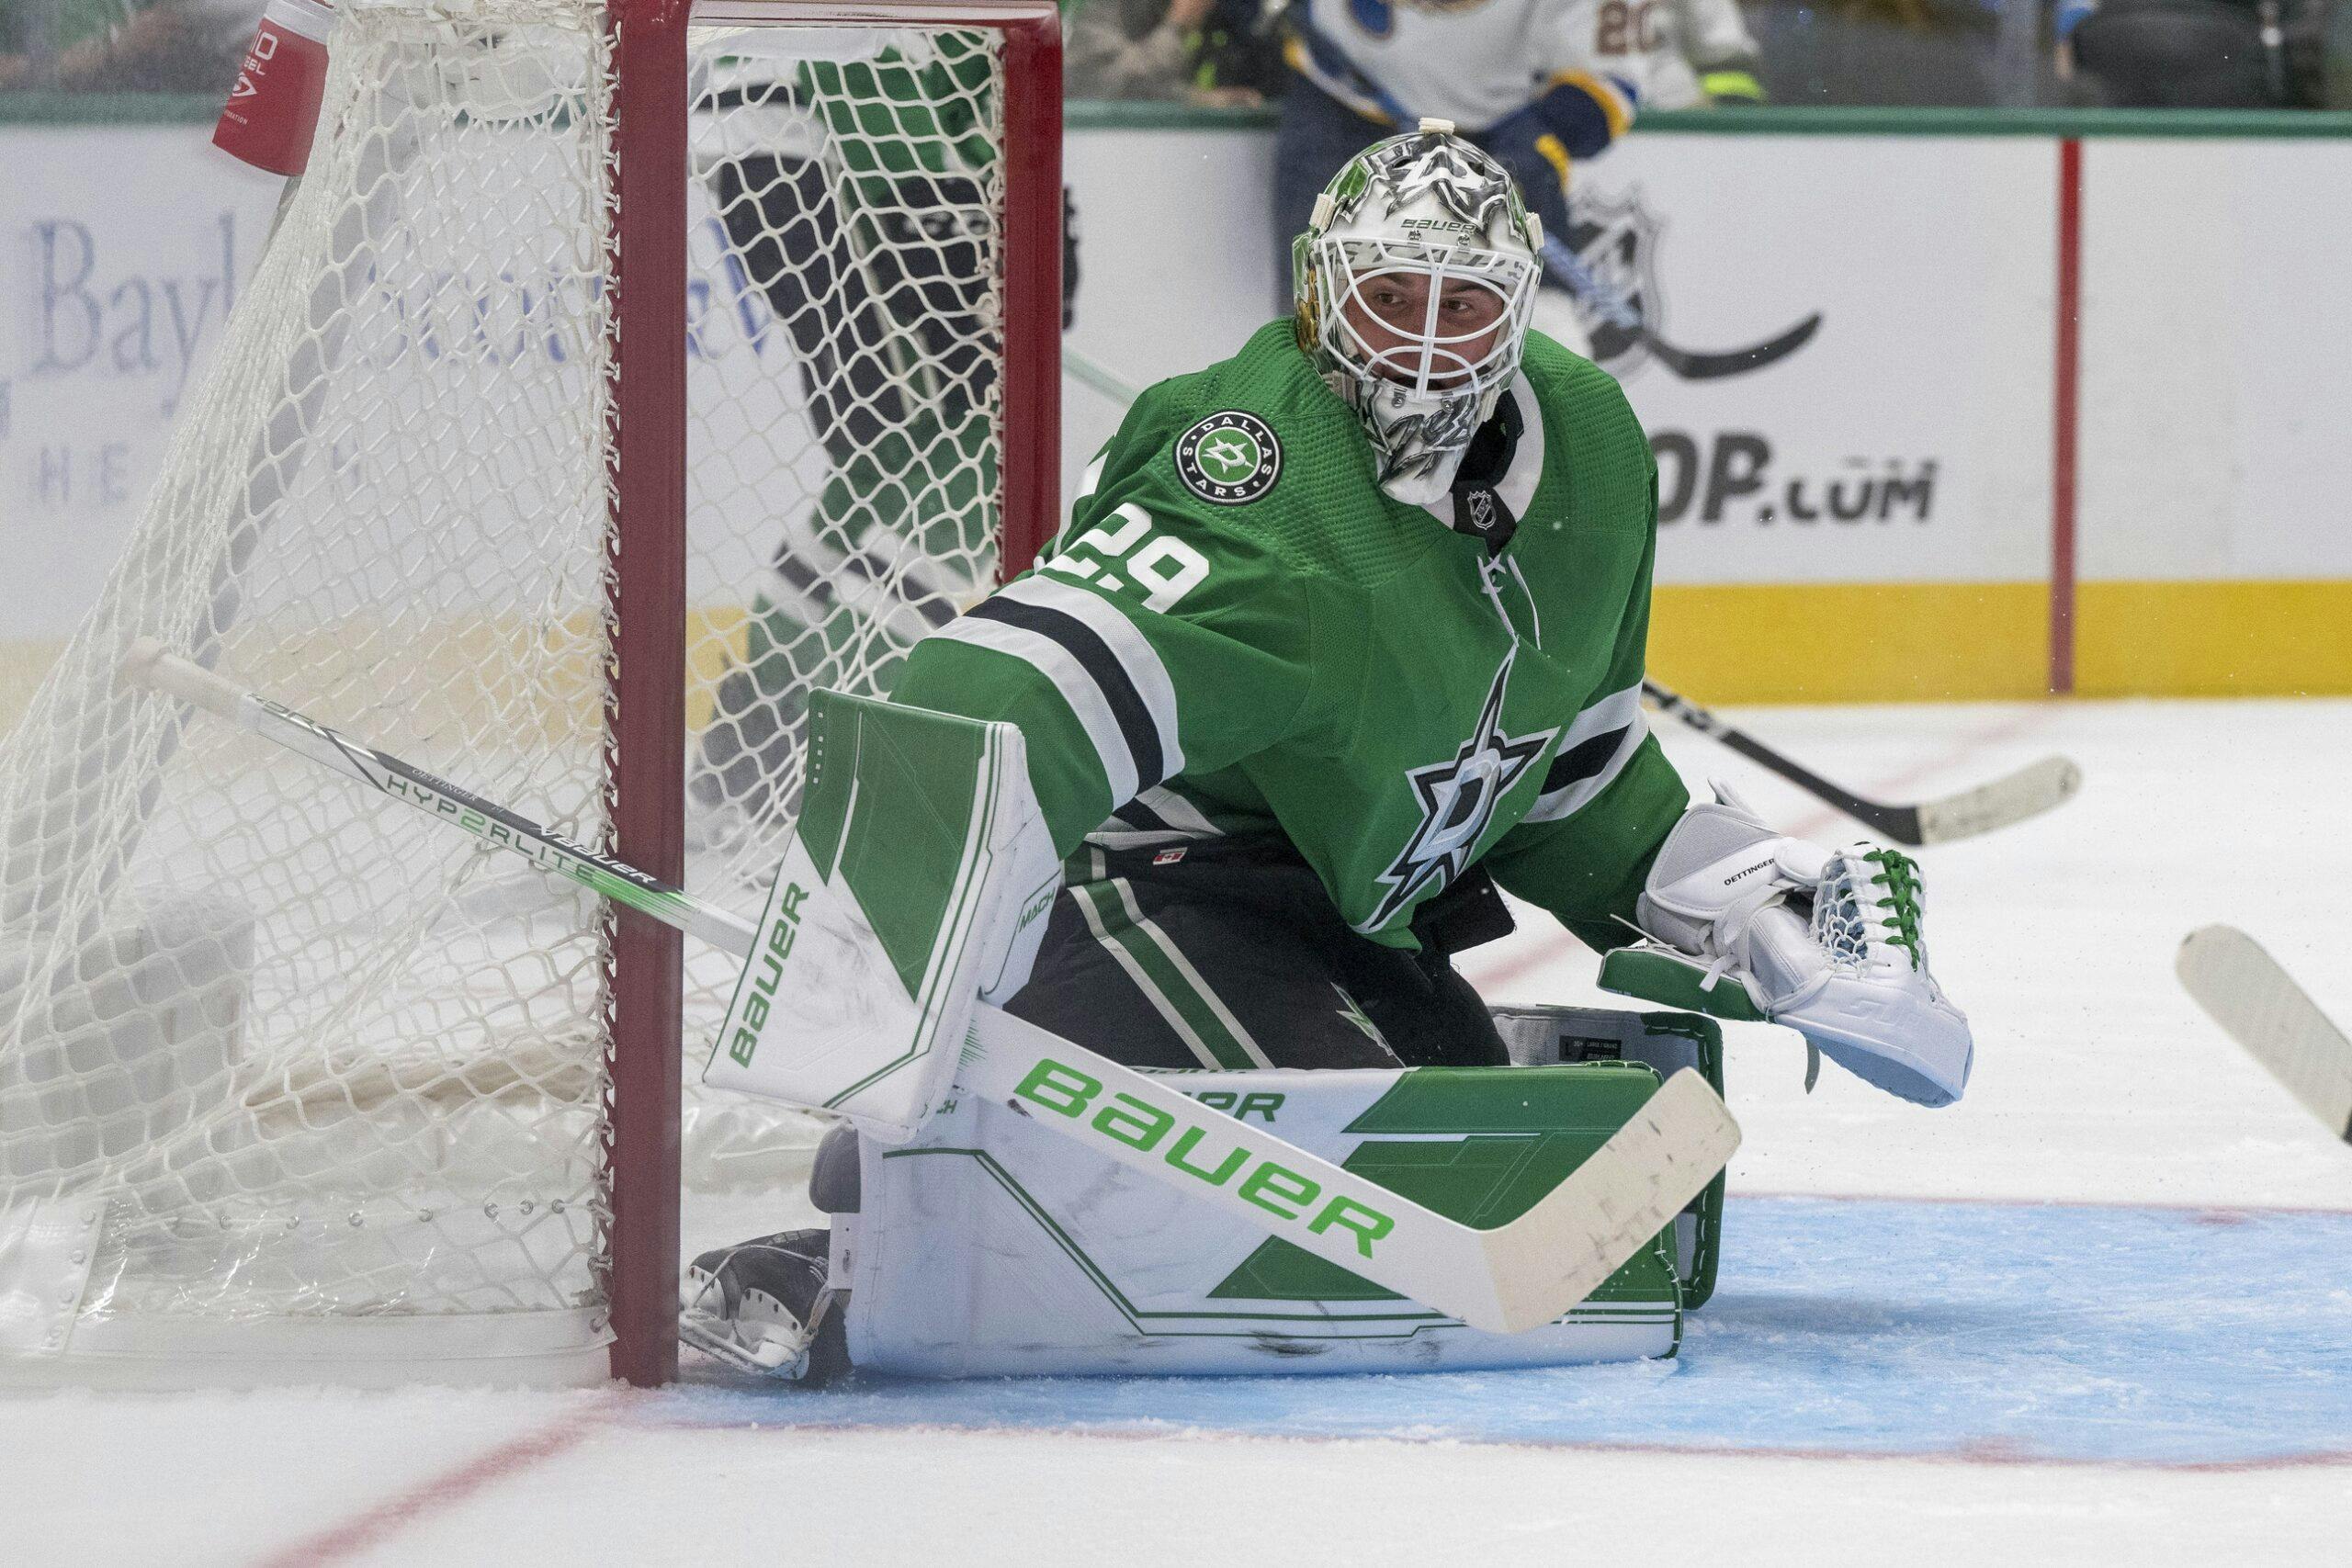 Jake Oettinger has elevated his game to new heights with Dallas Stars